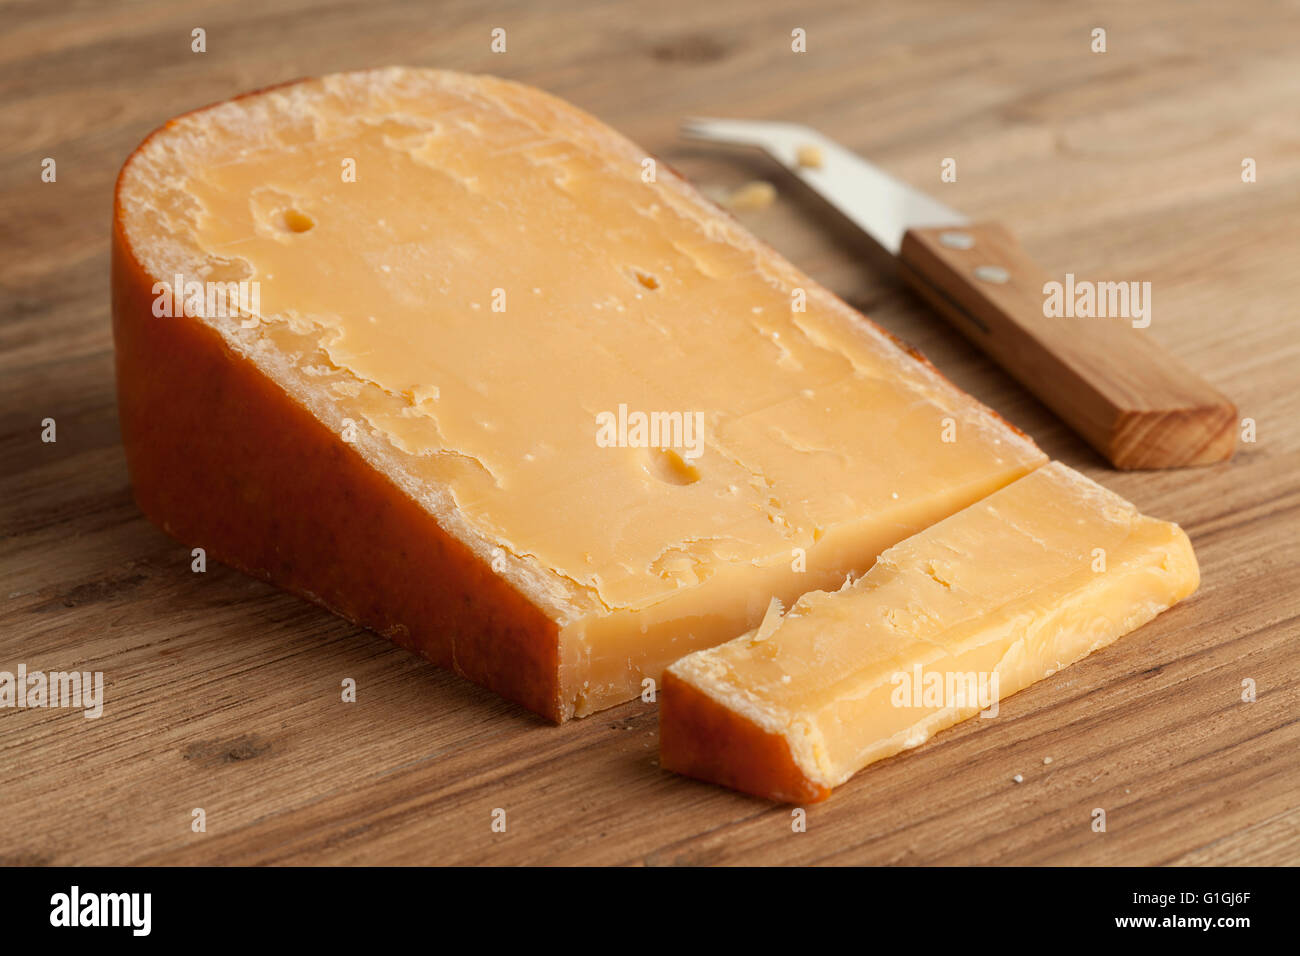 Piece of three year old Gouda cheese on a cheeseboard Stock Photo